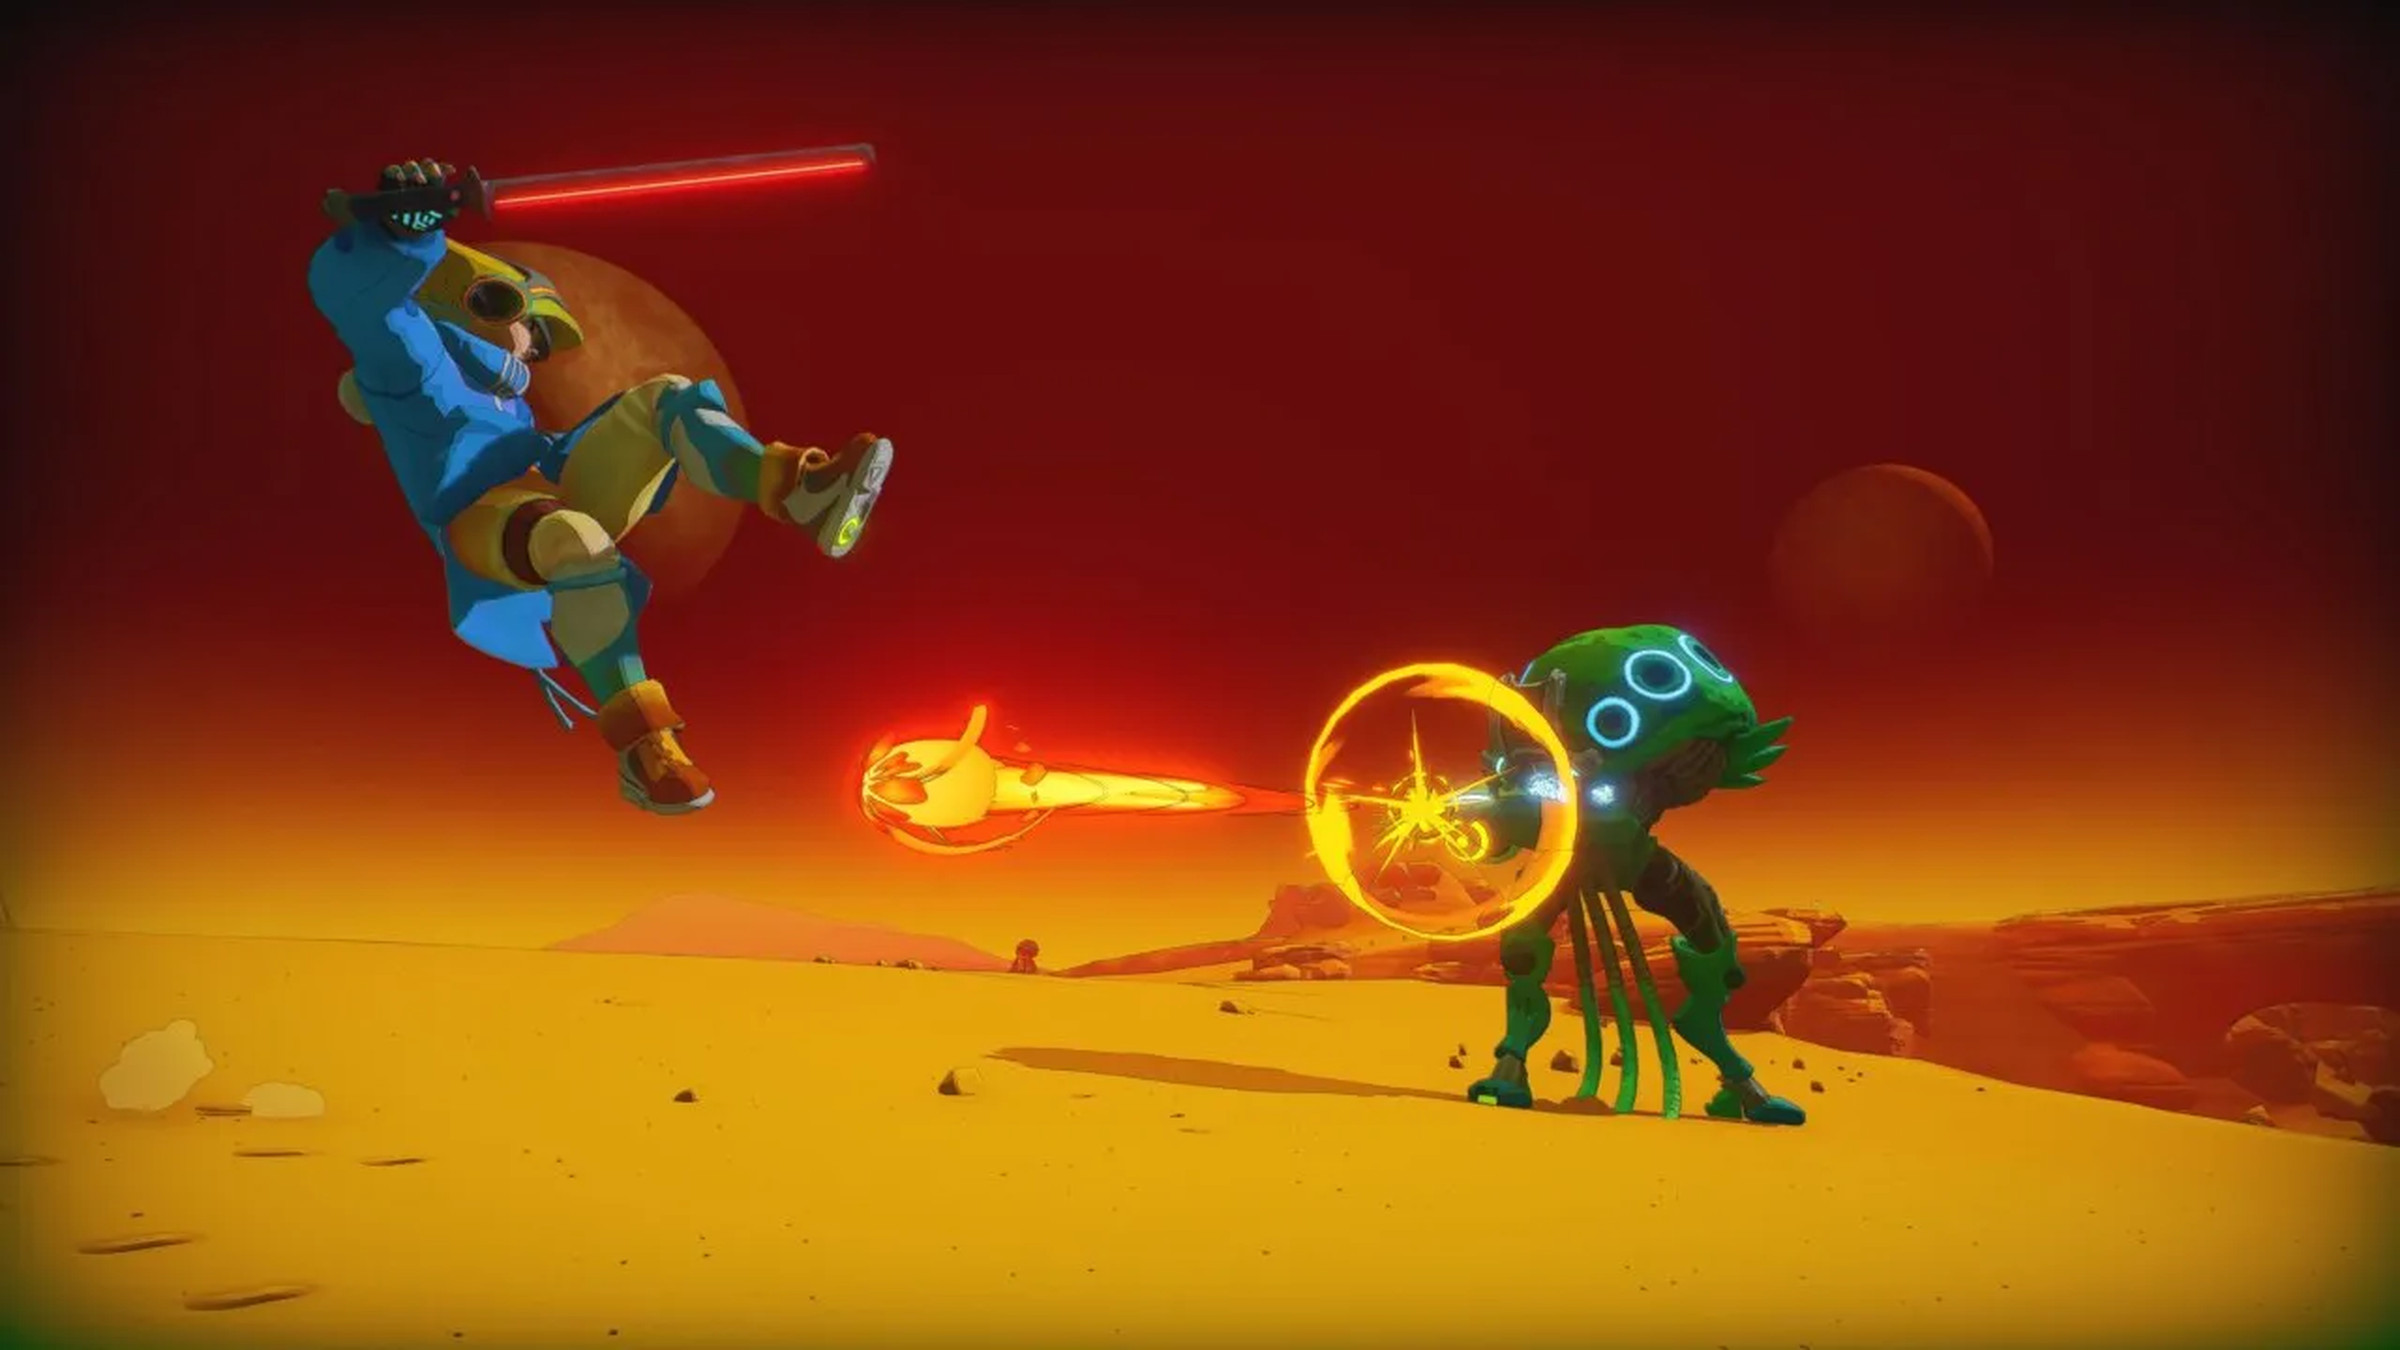 A screenshot from PixelJunk Raiders of a human player dodging a laser bolt fired from a jellyfish-like creature against a sandy landscape